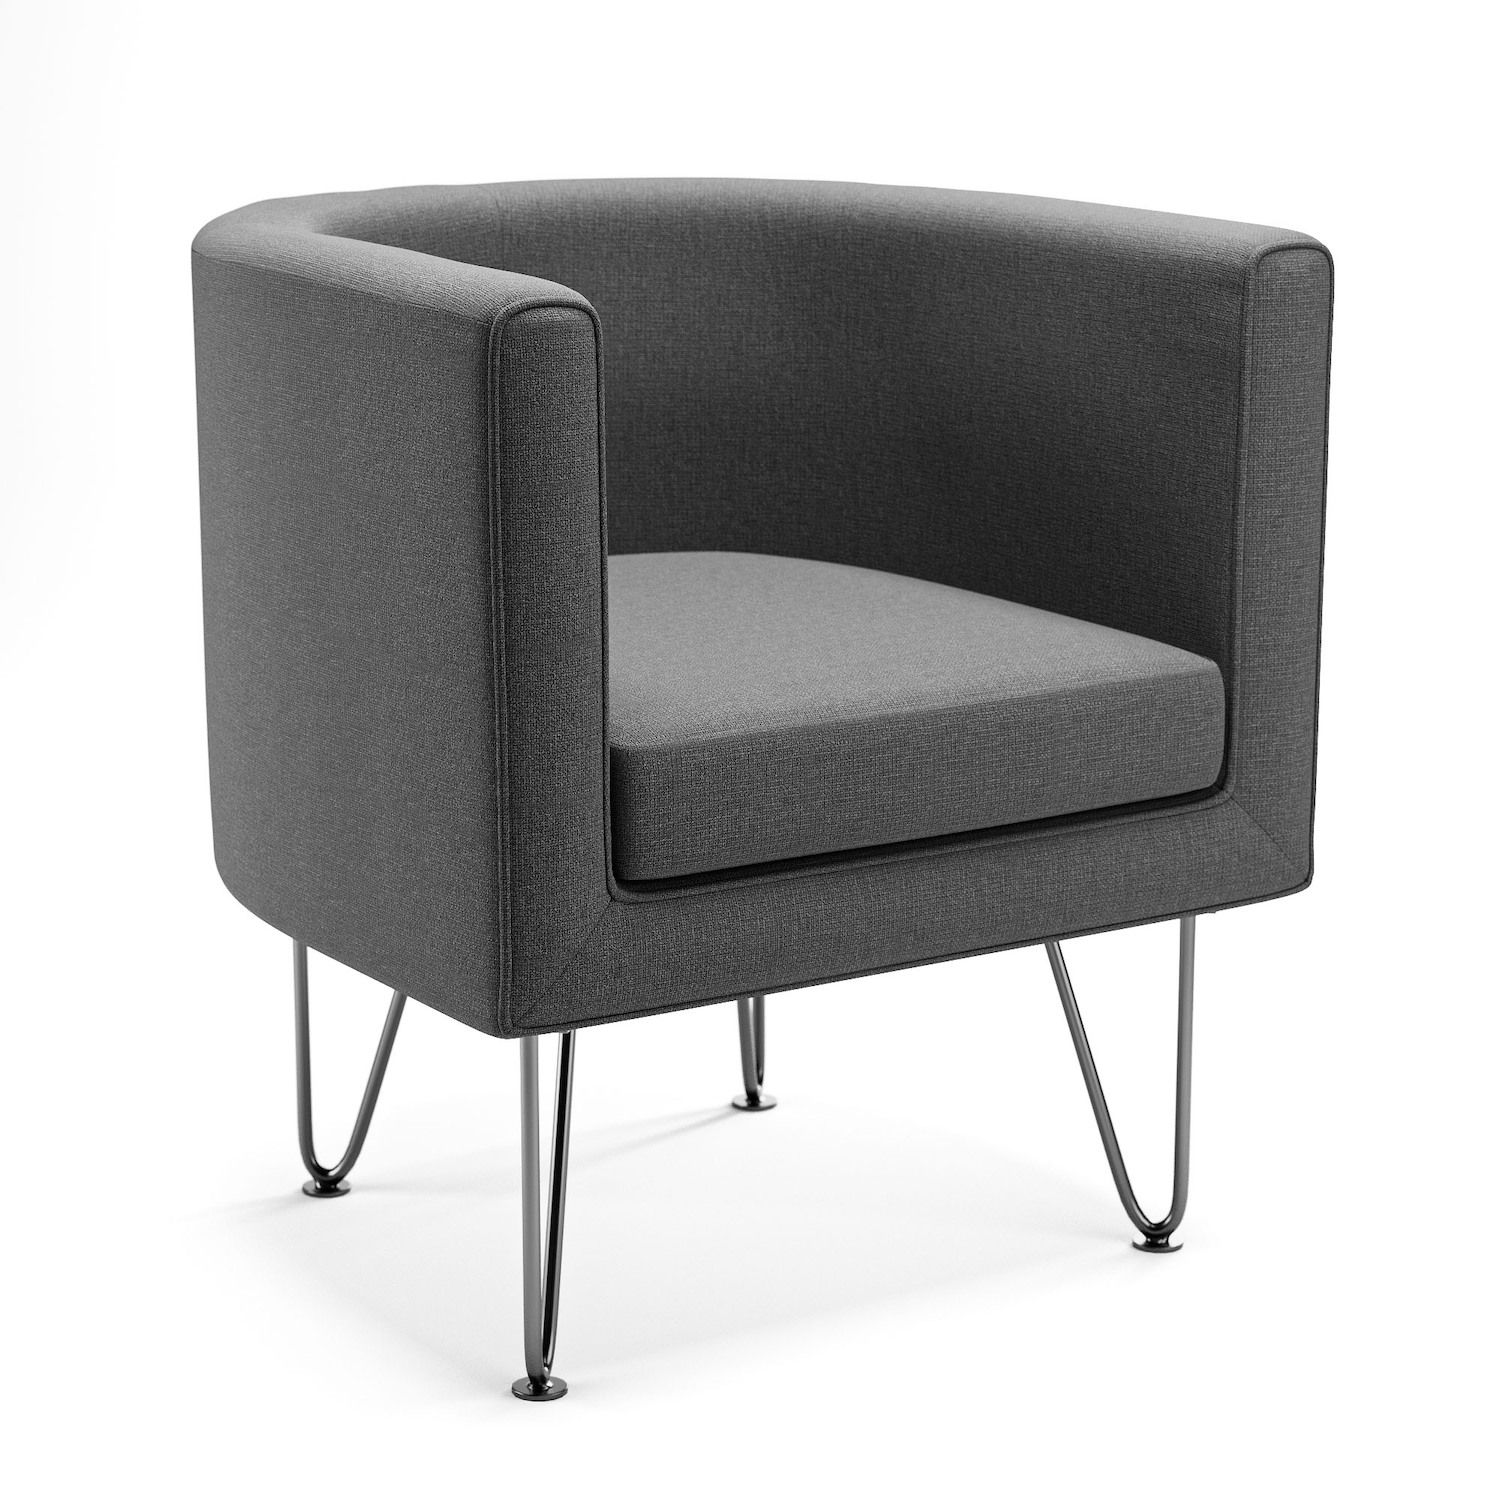 Image for Dream Collection Lucid Barrel Chair with Hairpin Legs at Kohl's.